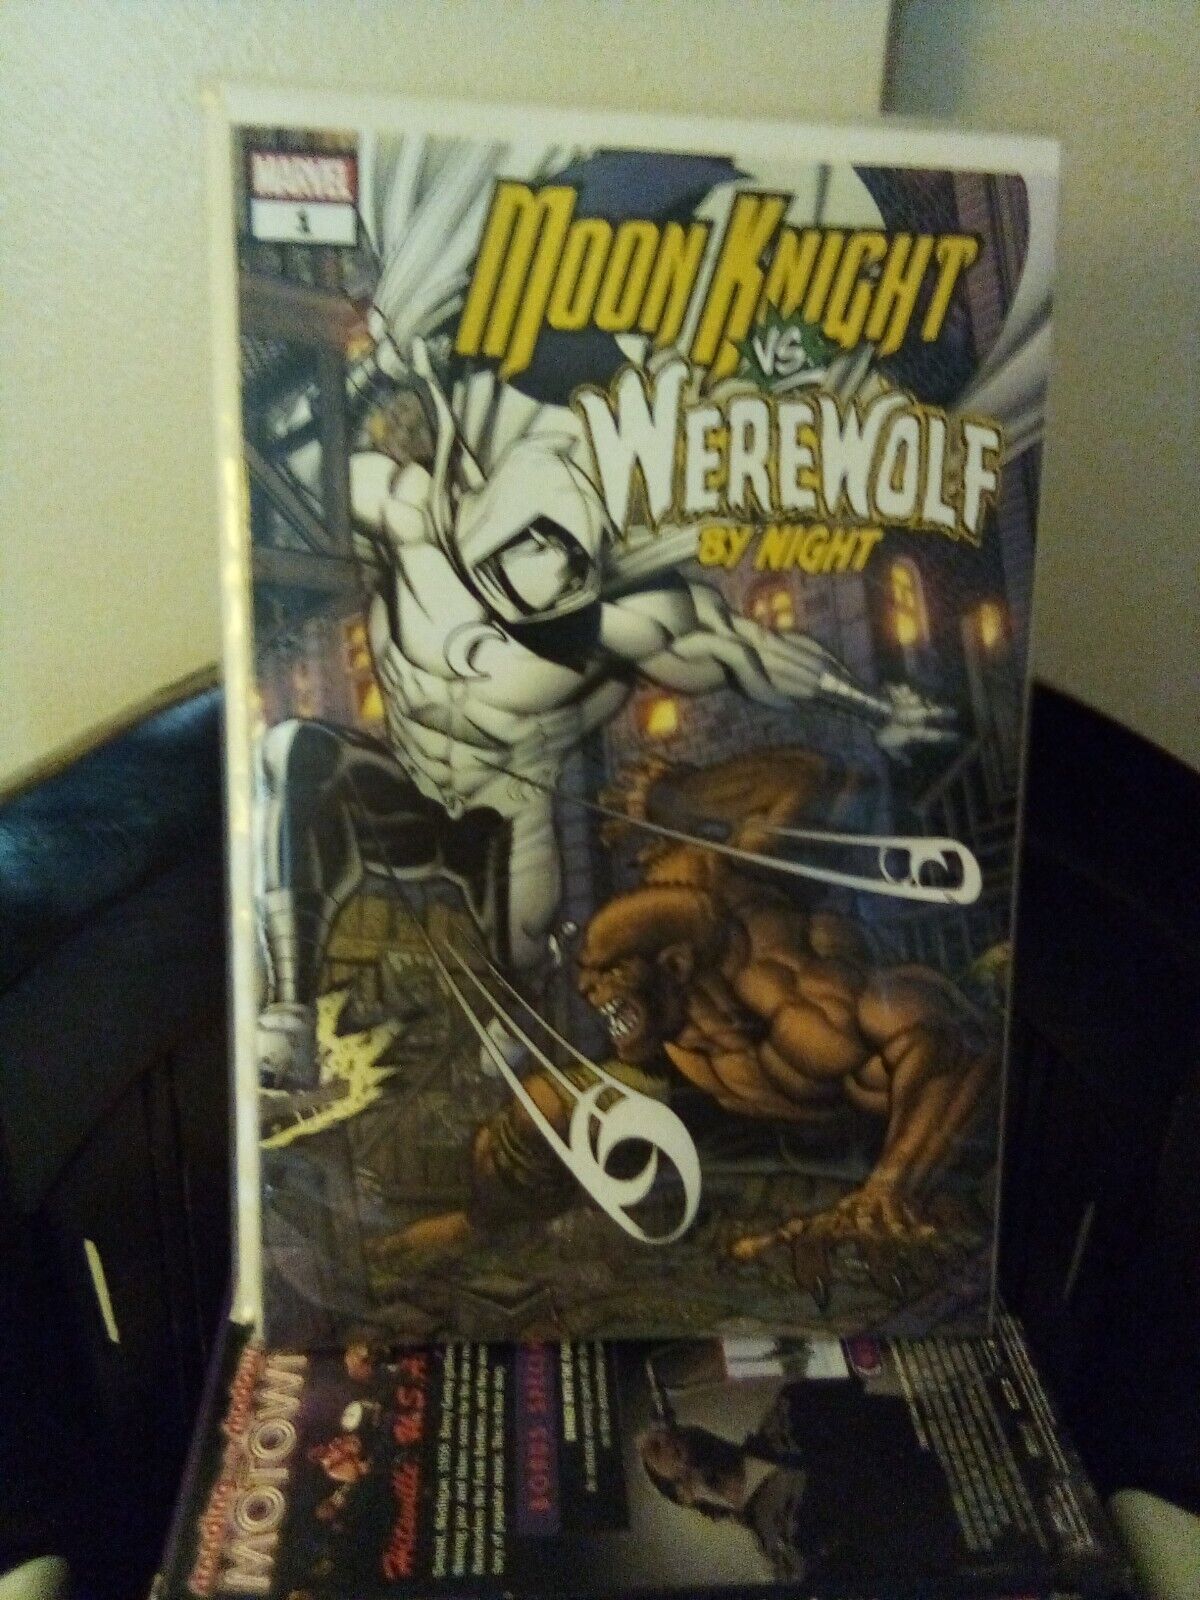 MOON KNIGHT VS WEREWOLF BY NIGHT #1. Released October 2023. 